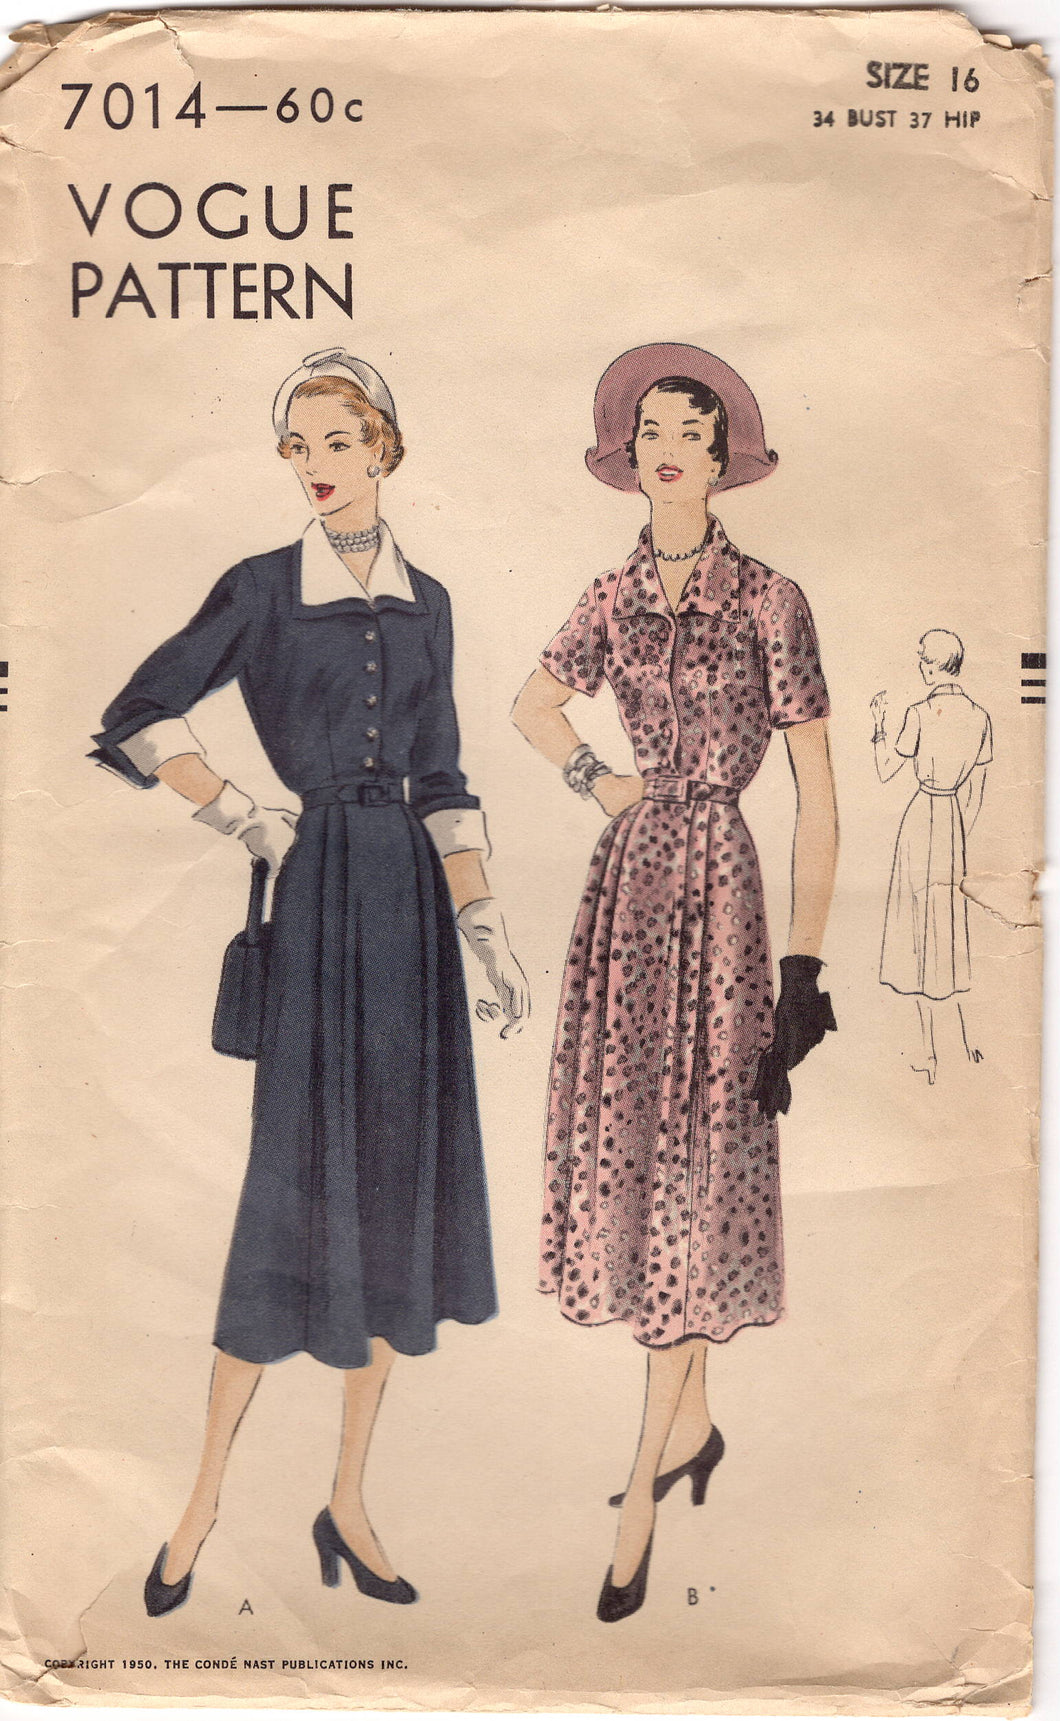 1950's Vogue Shirtwaist Dress Pattern with Double Collar and Cuff - Bust 34